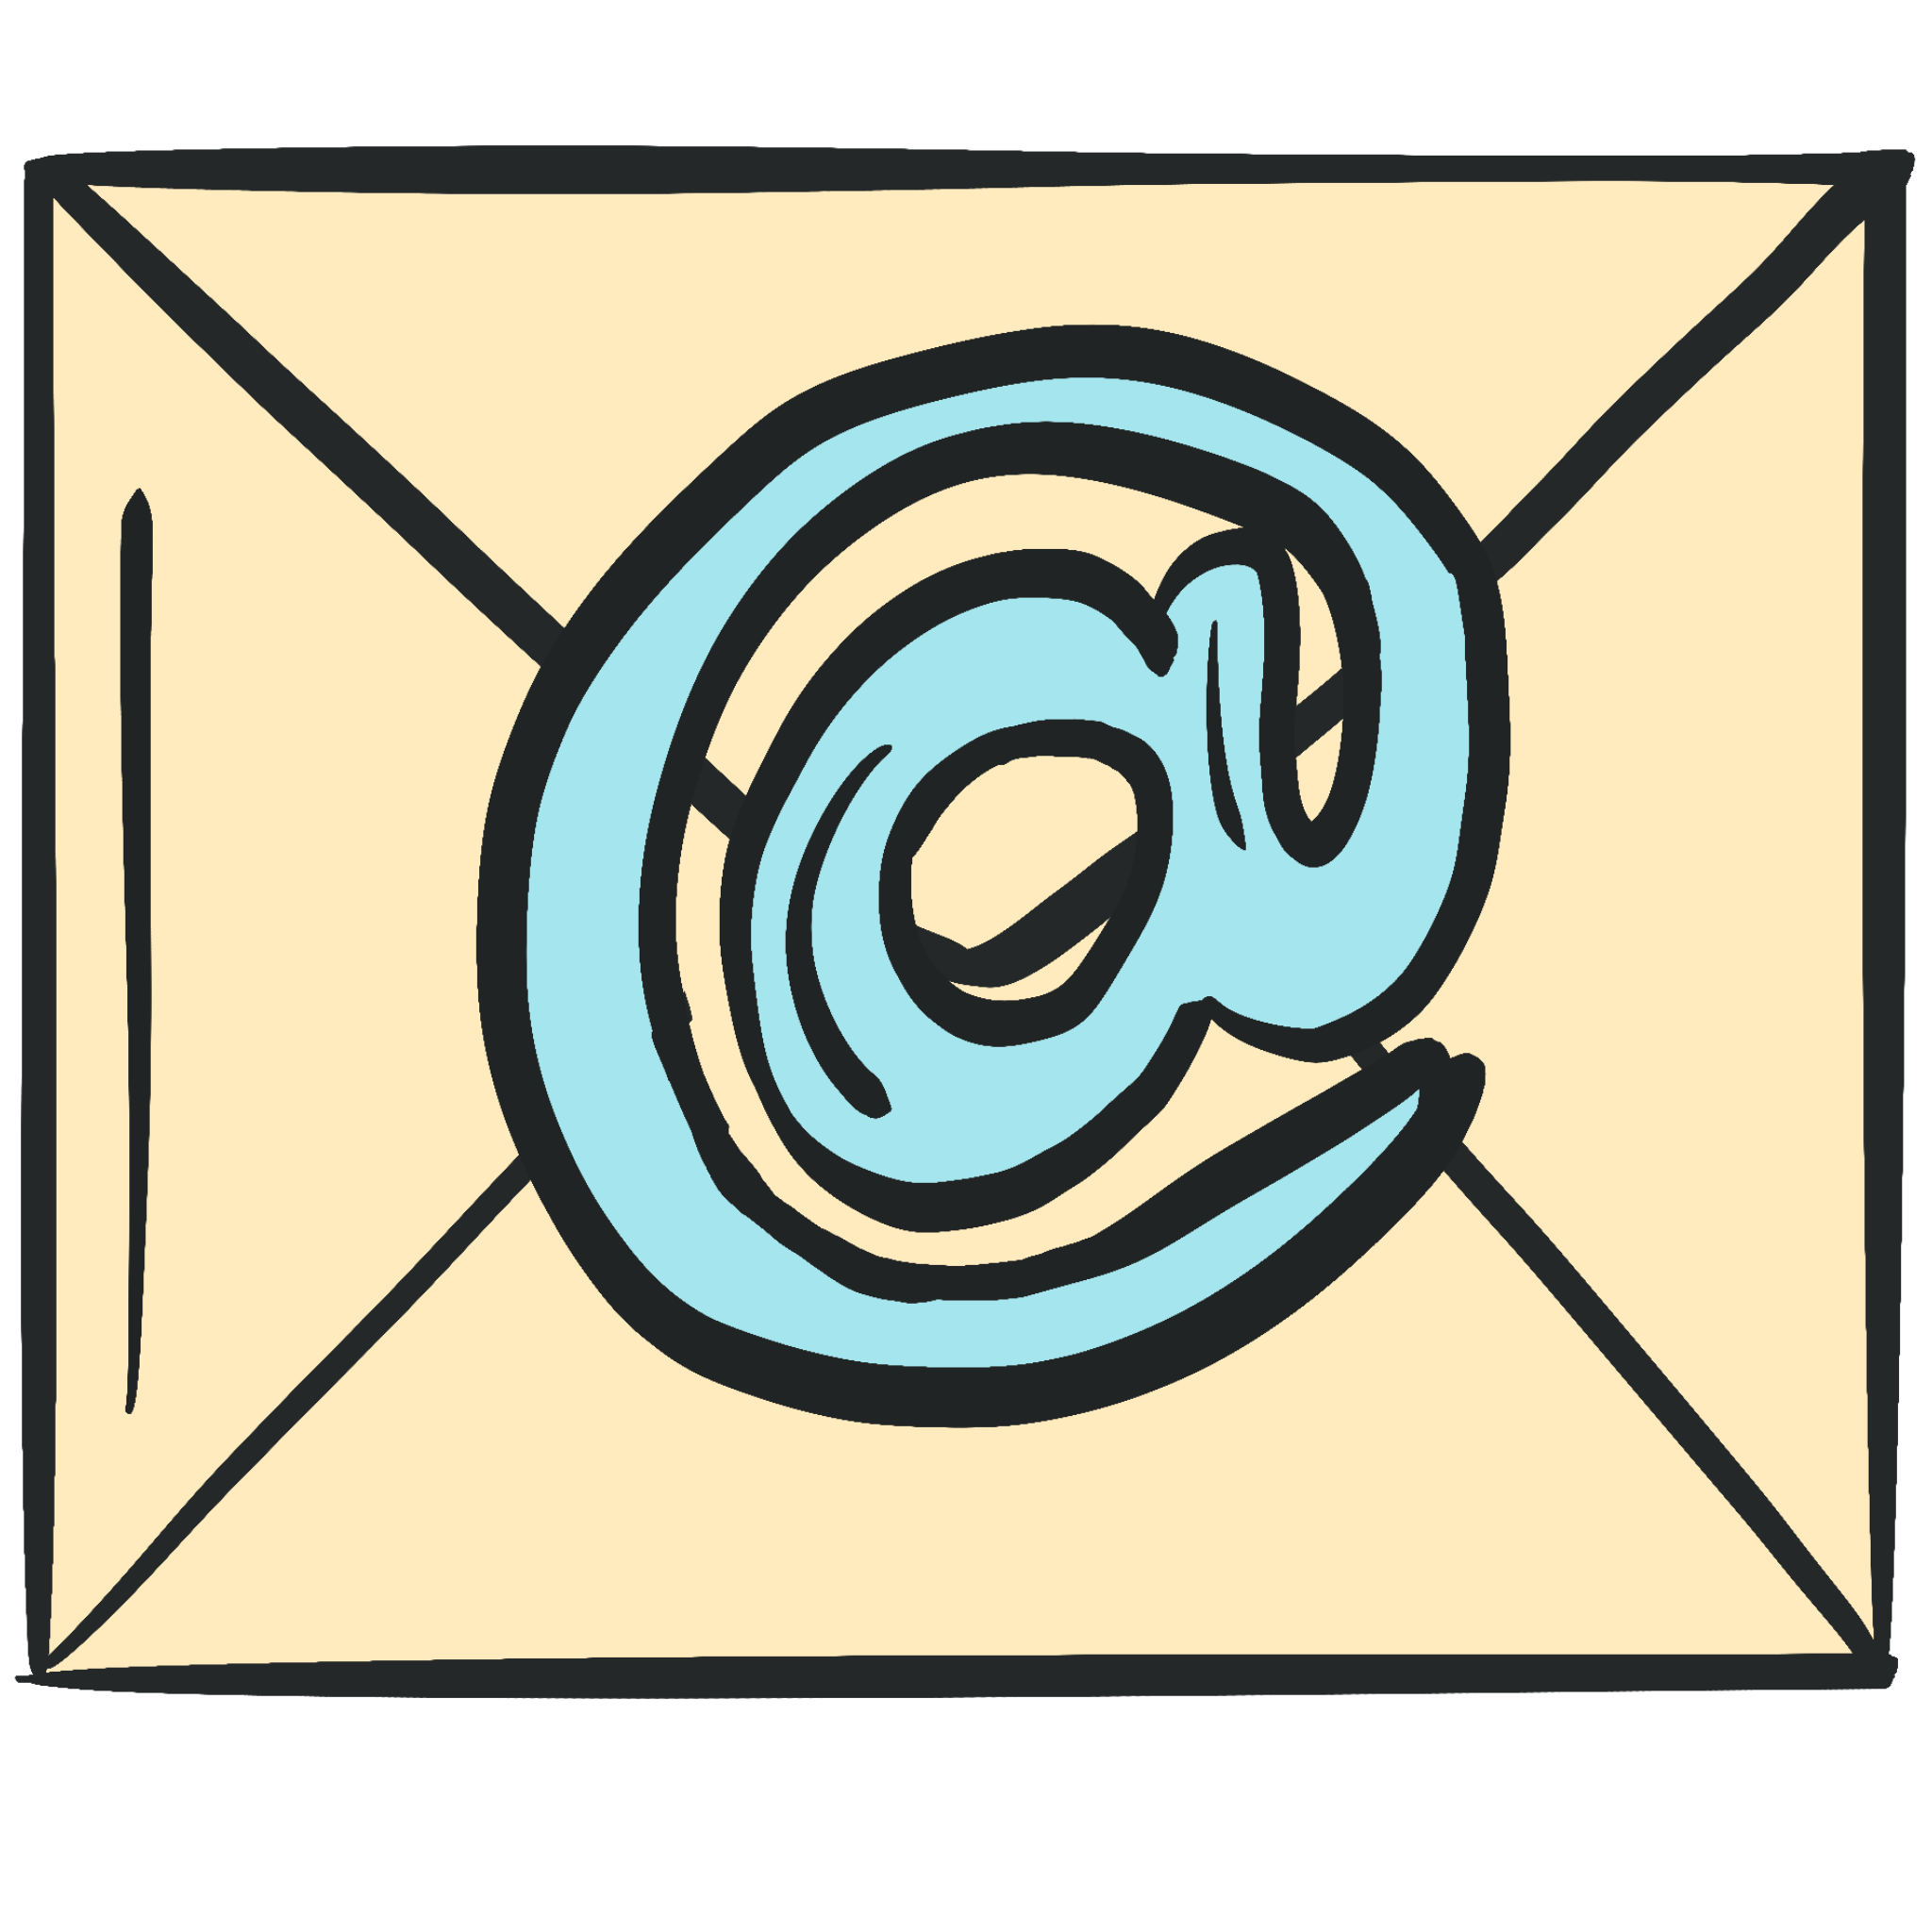 Hand-drawn icon of a letter envelope